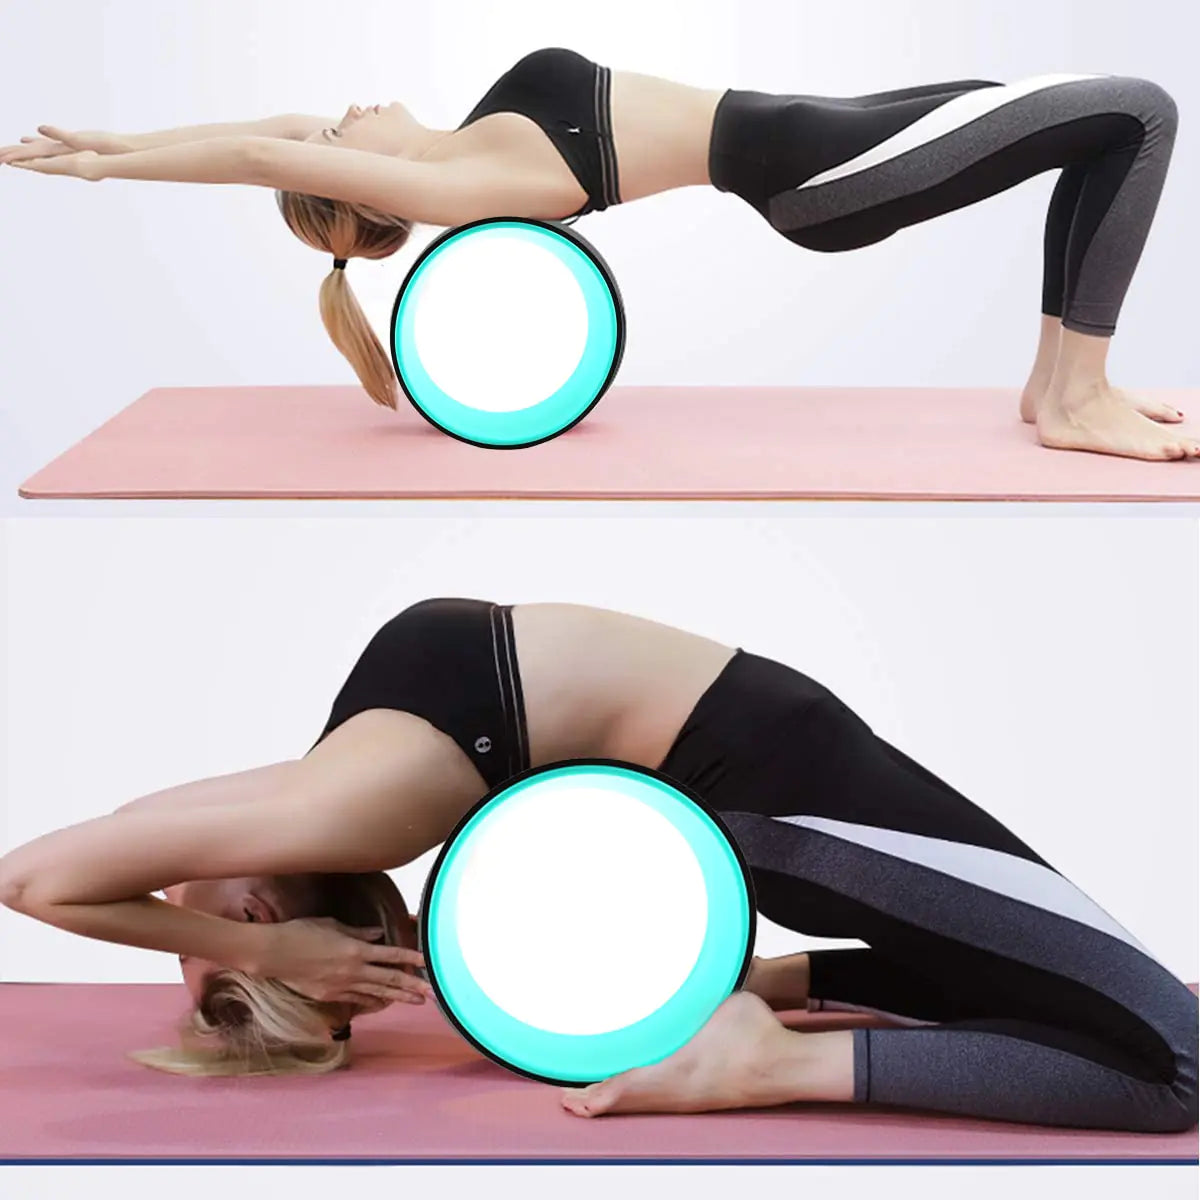 Professional Yoga Wheel For Deeper Poses & Core Strength